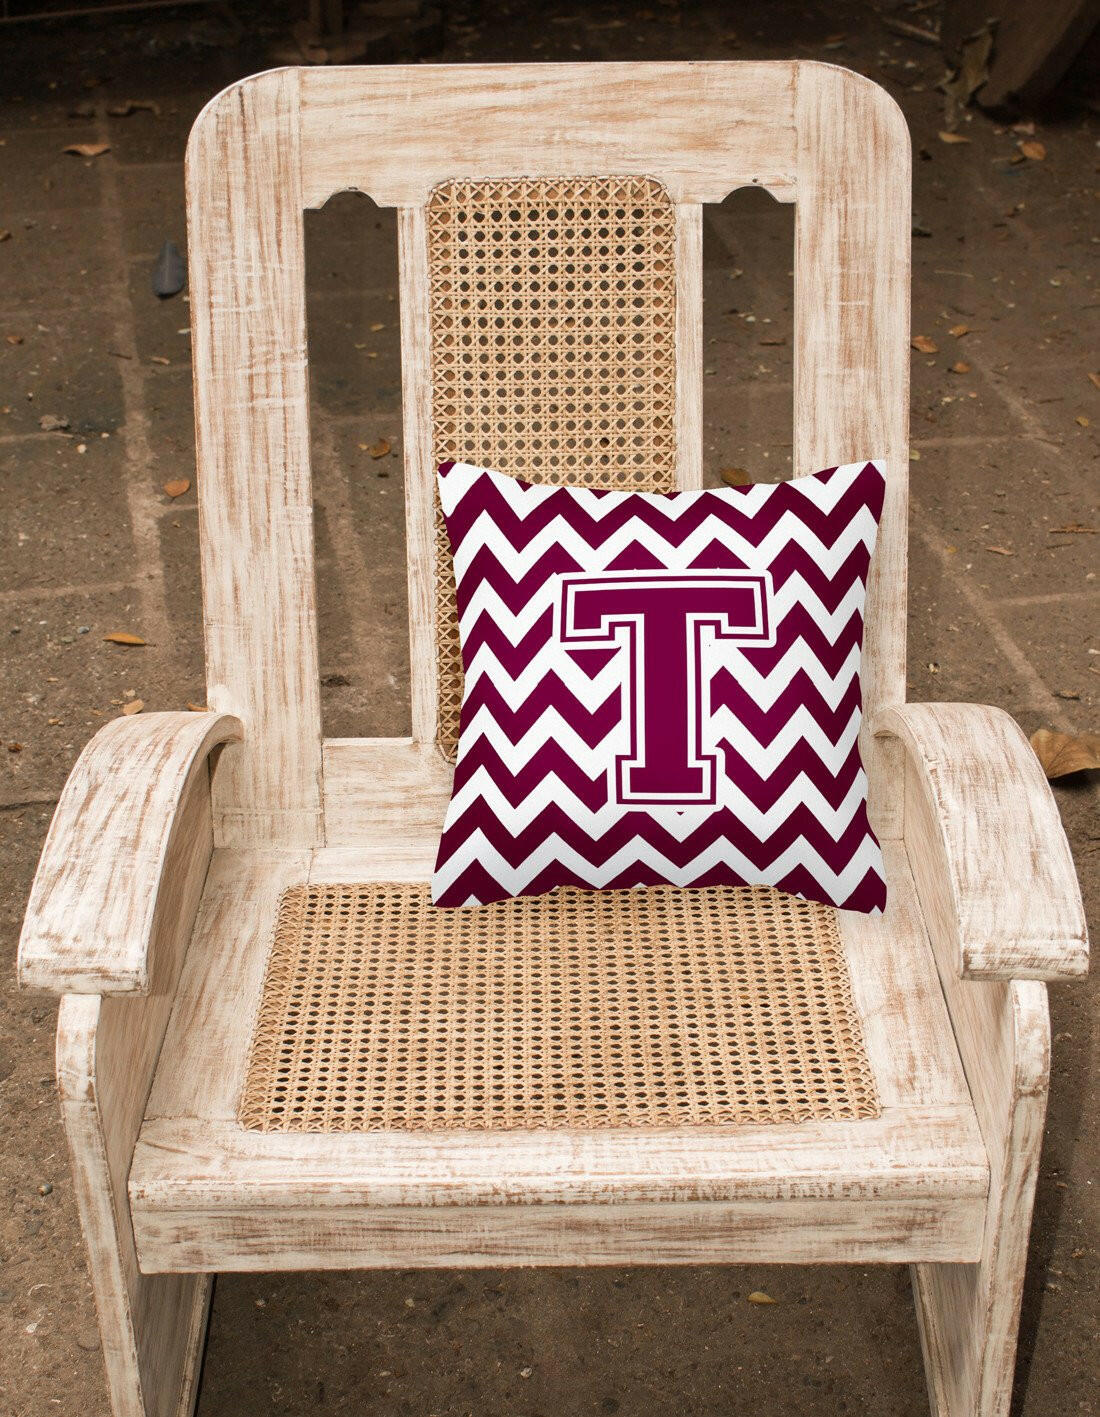 Letter T Chevron Maroon and White  Fabric Decorative Pillow CJ1051-TPW1414 by Caroline's Treasures